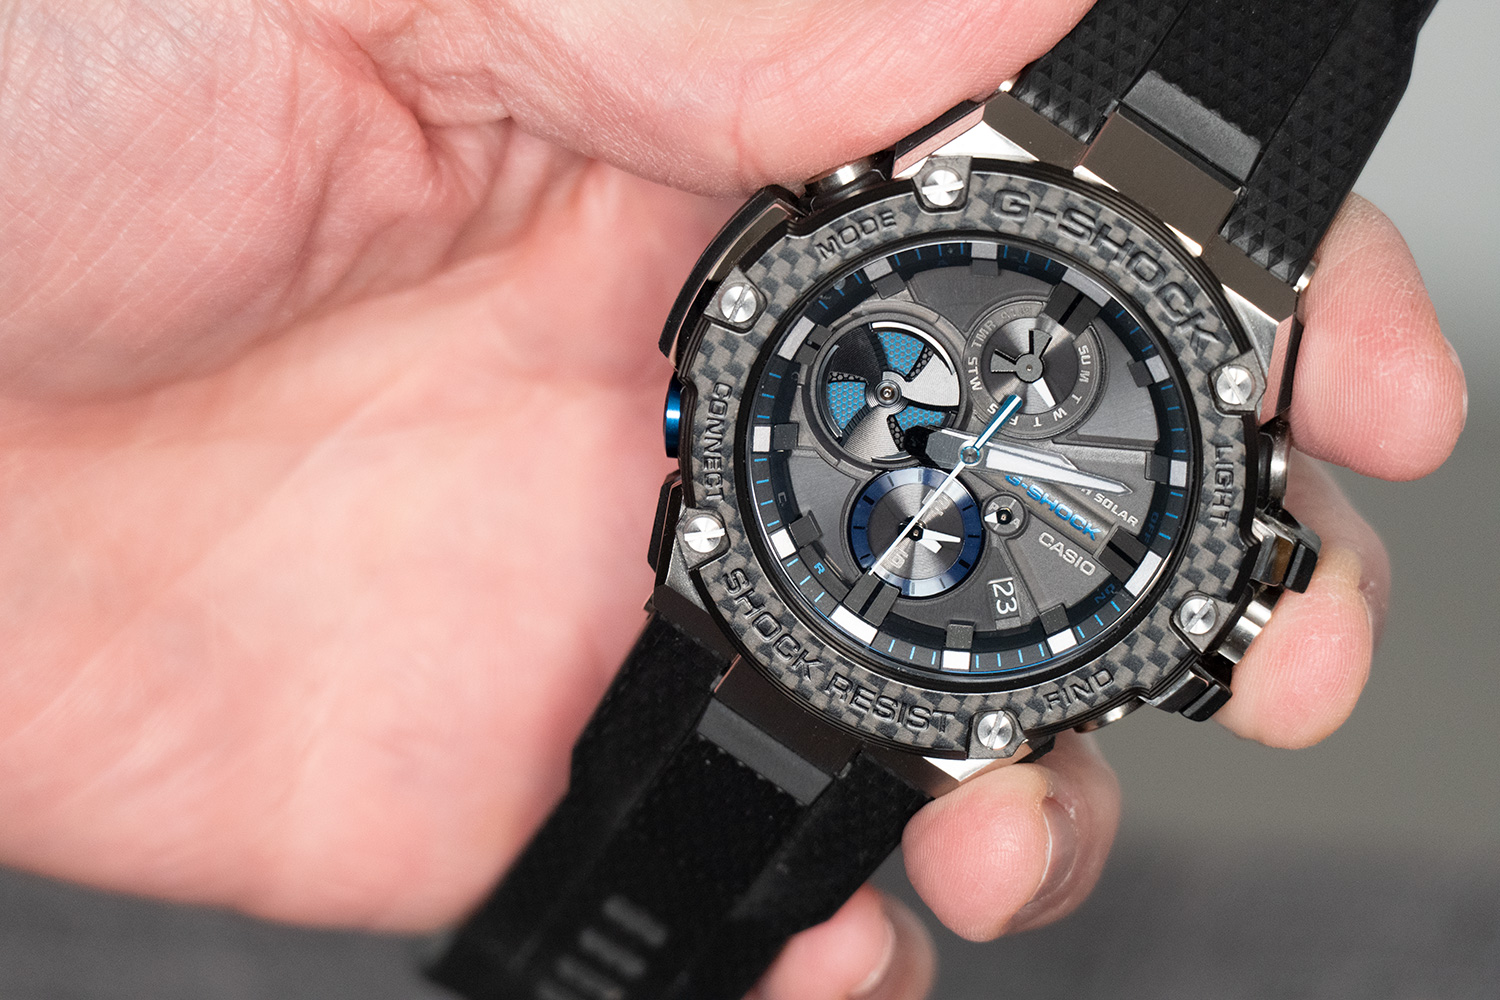 Casio's All-Metal G-Shock Uses its Smart Tech Carefully, For Full